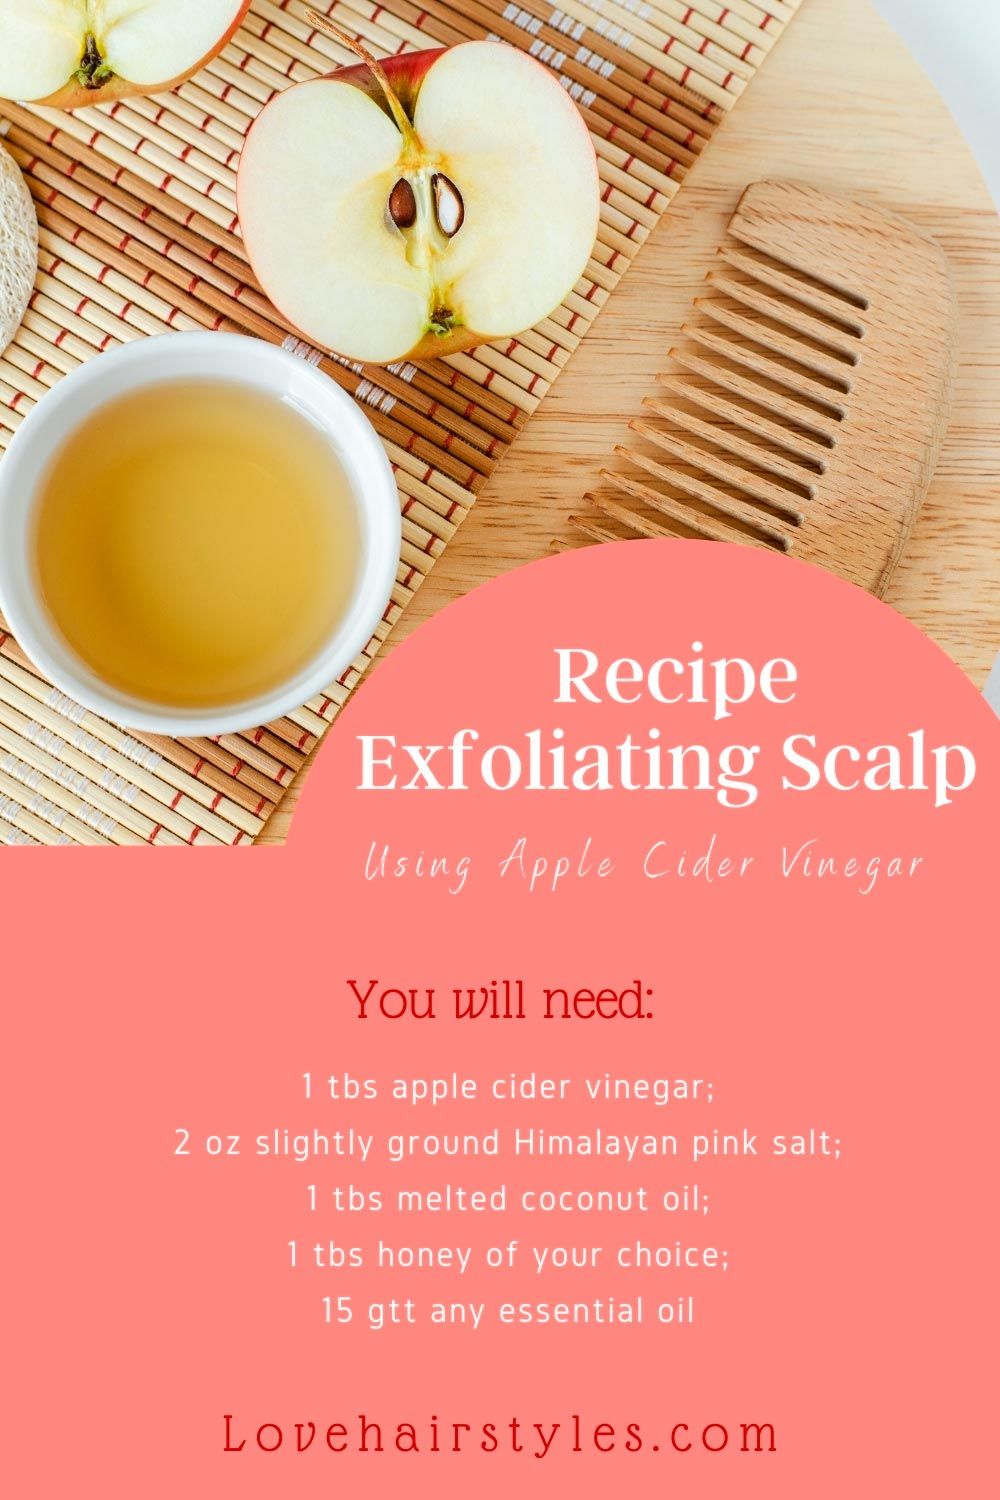 How To Exfoliate Scalp: Step-By-Step Guide - Love Hairstyles